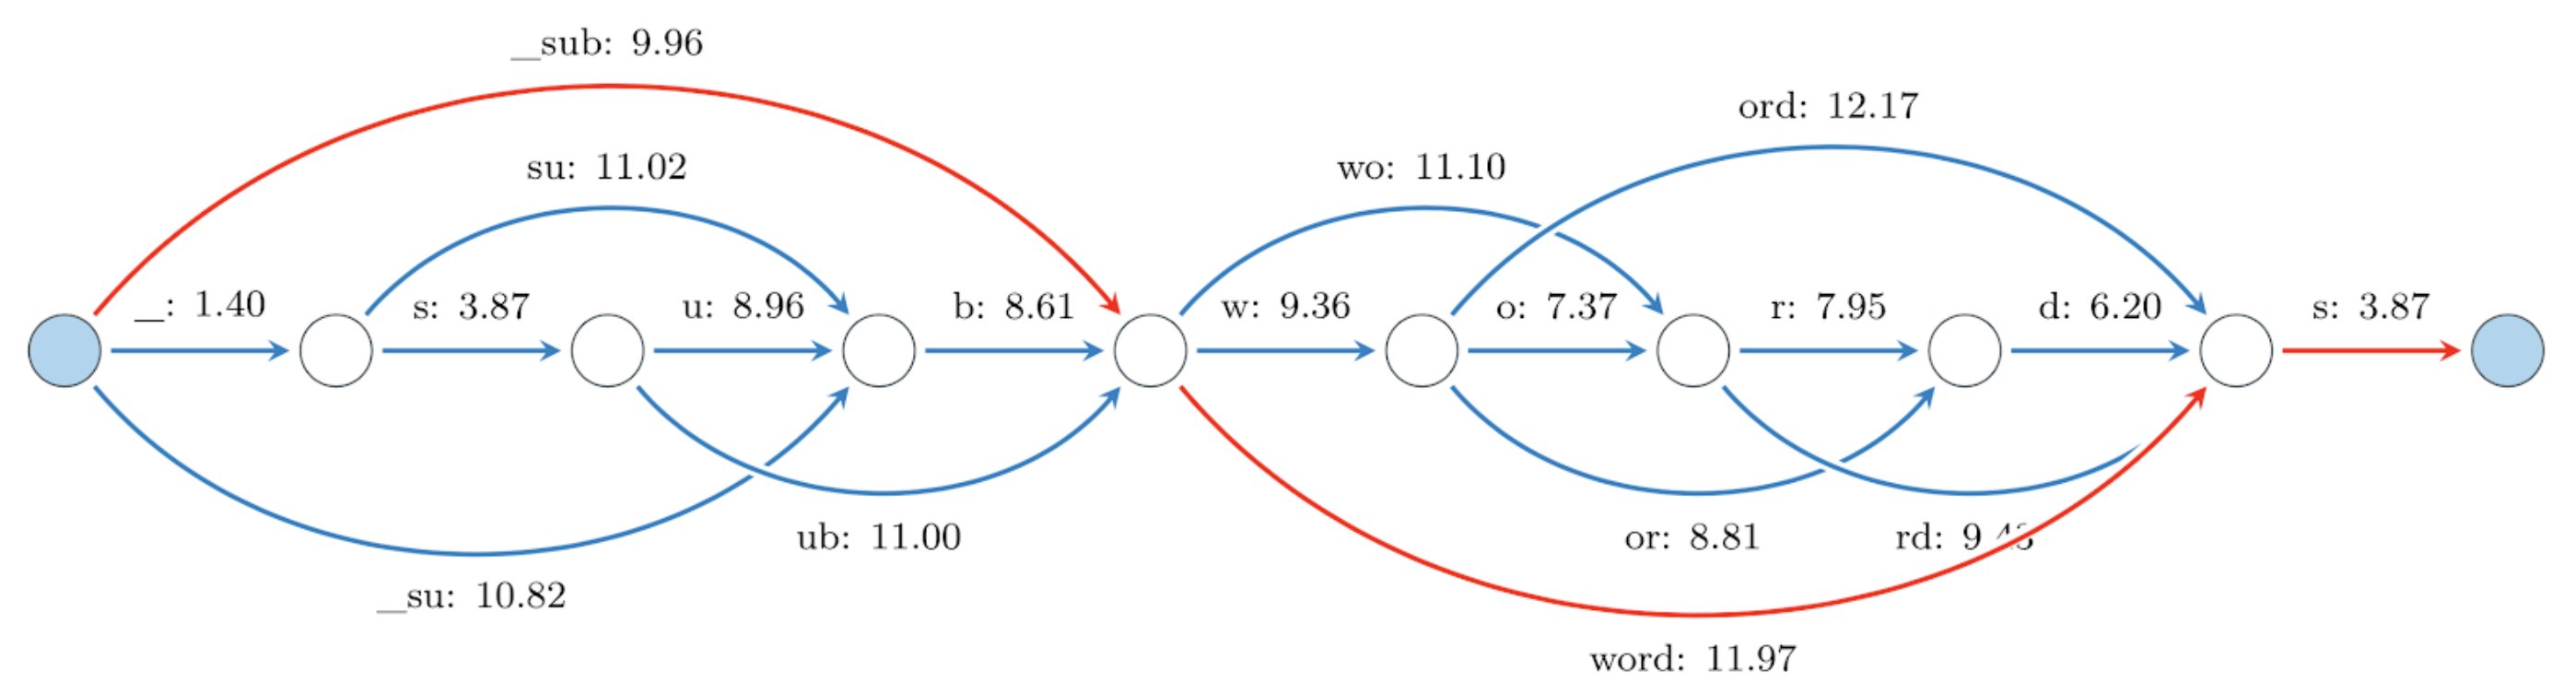 A graph of possible subword tokenizations for the token '_subwords'. The number next to each token is its negative log 
likelihood. The most probable tokenization corresponds to the shortest weighted path connecting the blue nodes 
(indicated in red).